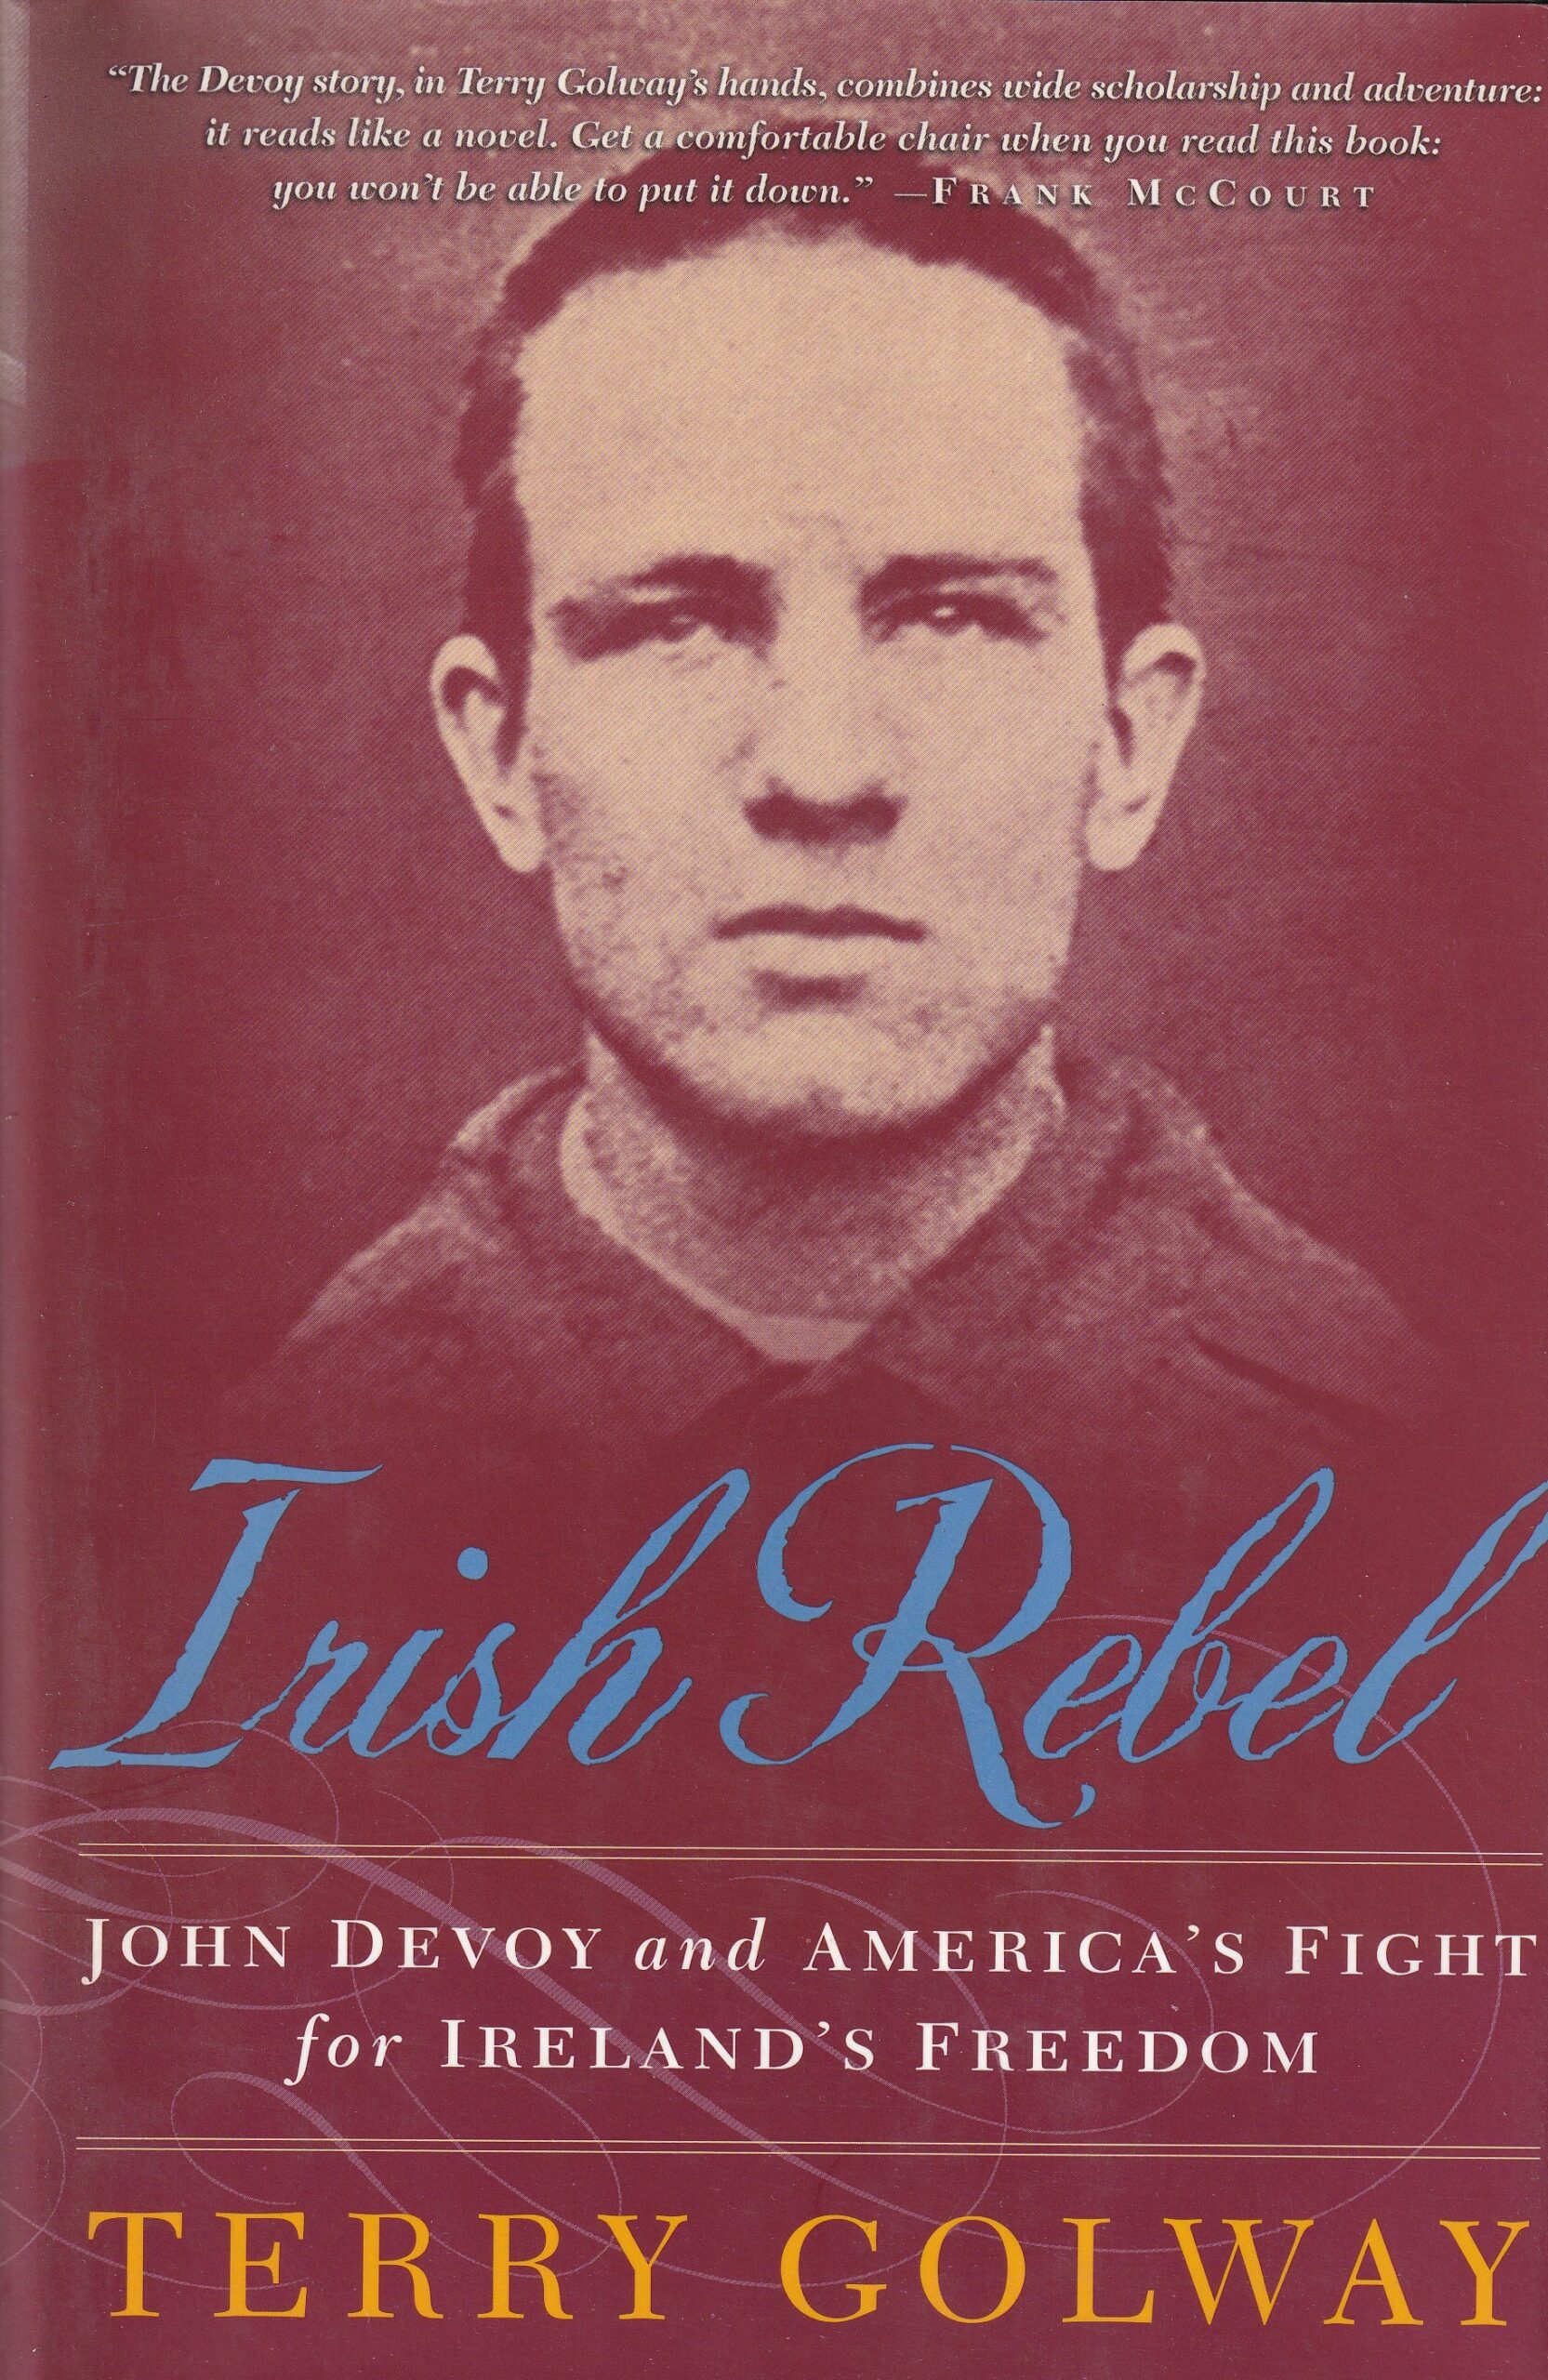 Irish Rebel: John Devoy and America’s Fight for Ireland’s Freedom | Terry Golway | Charlie Byrne's